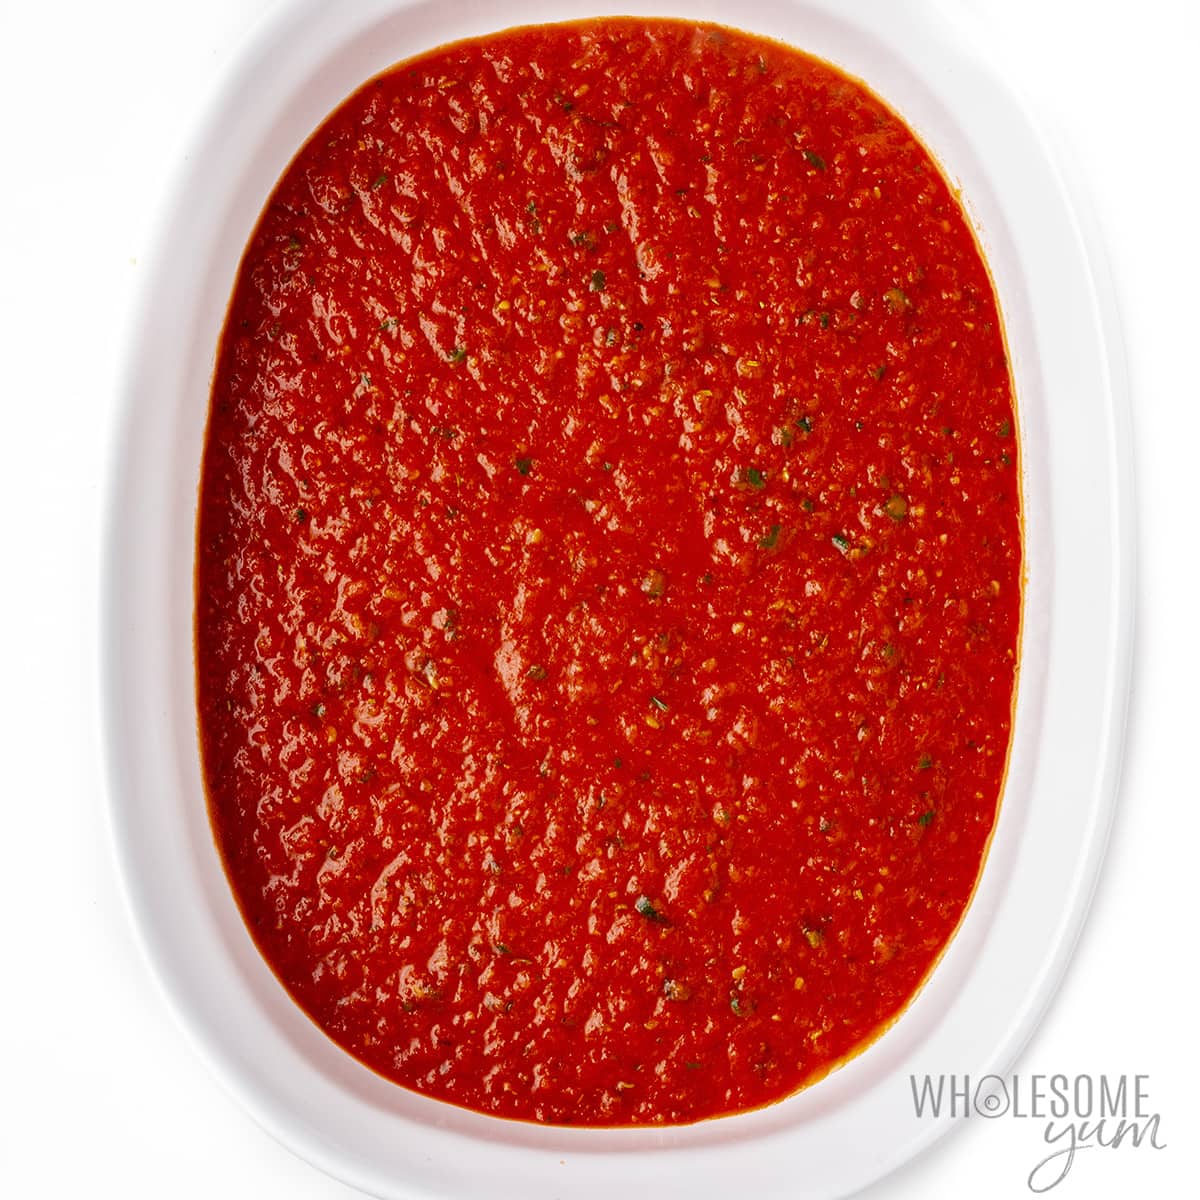 Sauce poured in a thin layer at the bottom of the baking dish.